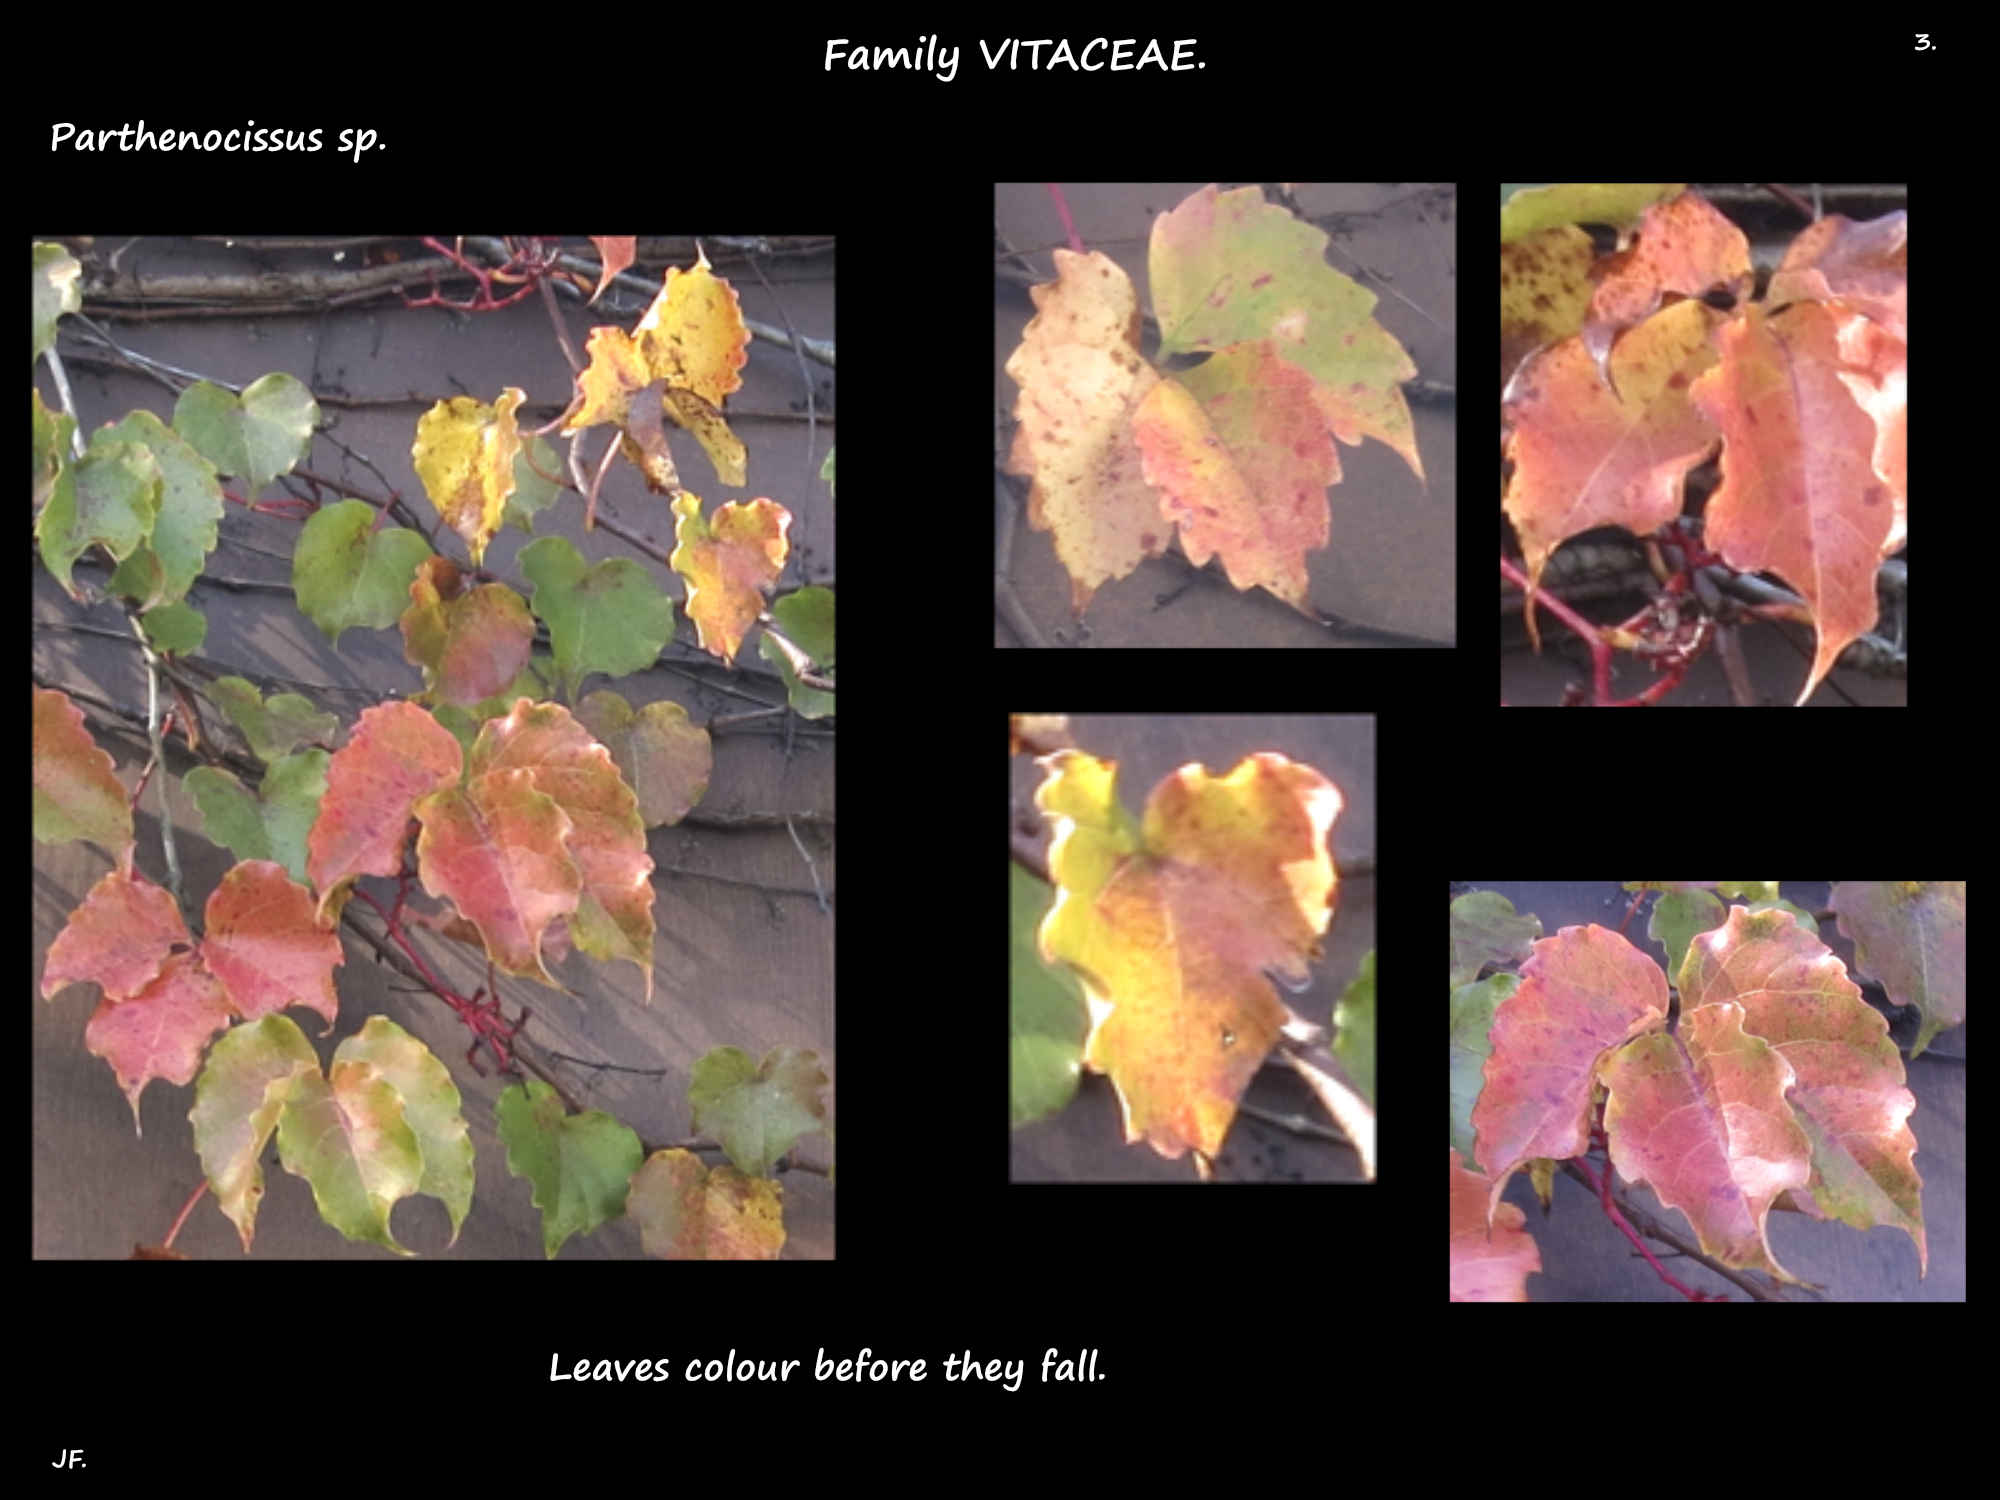 3 Colour changes in the leaves of a Parthenocissus vine